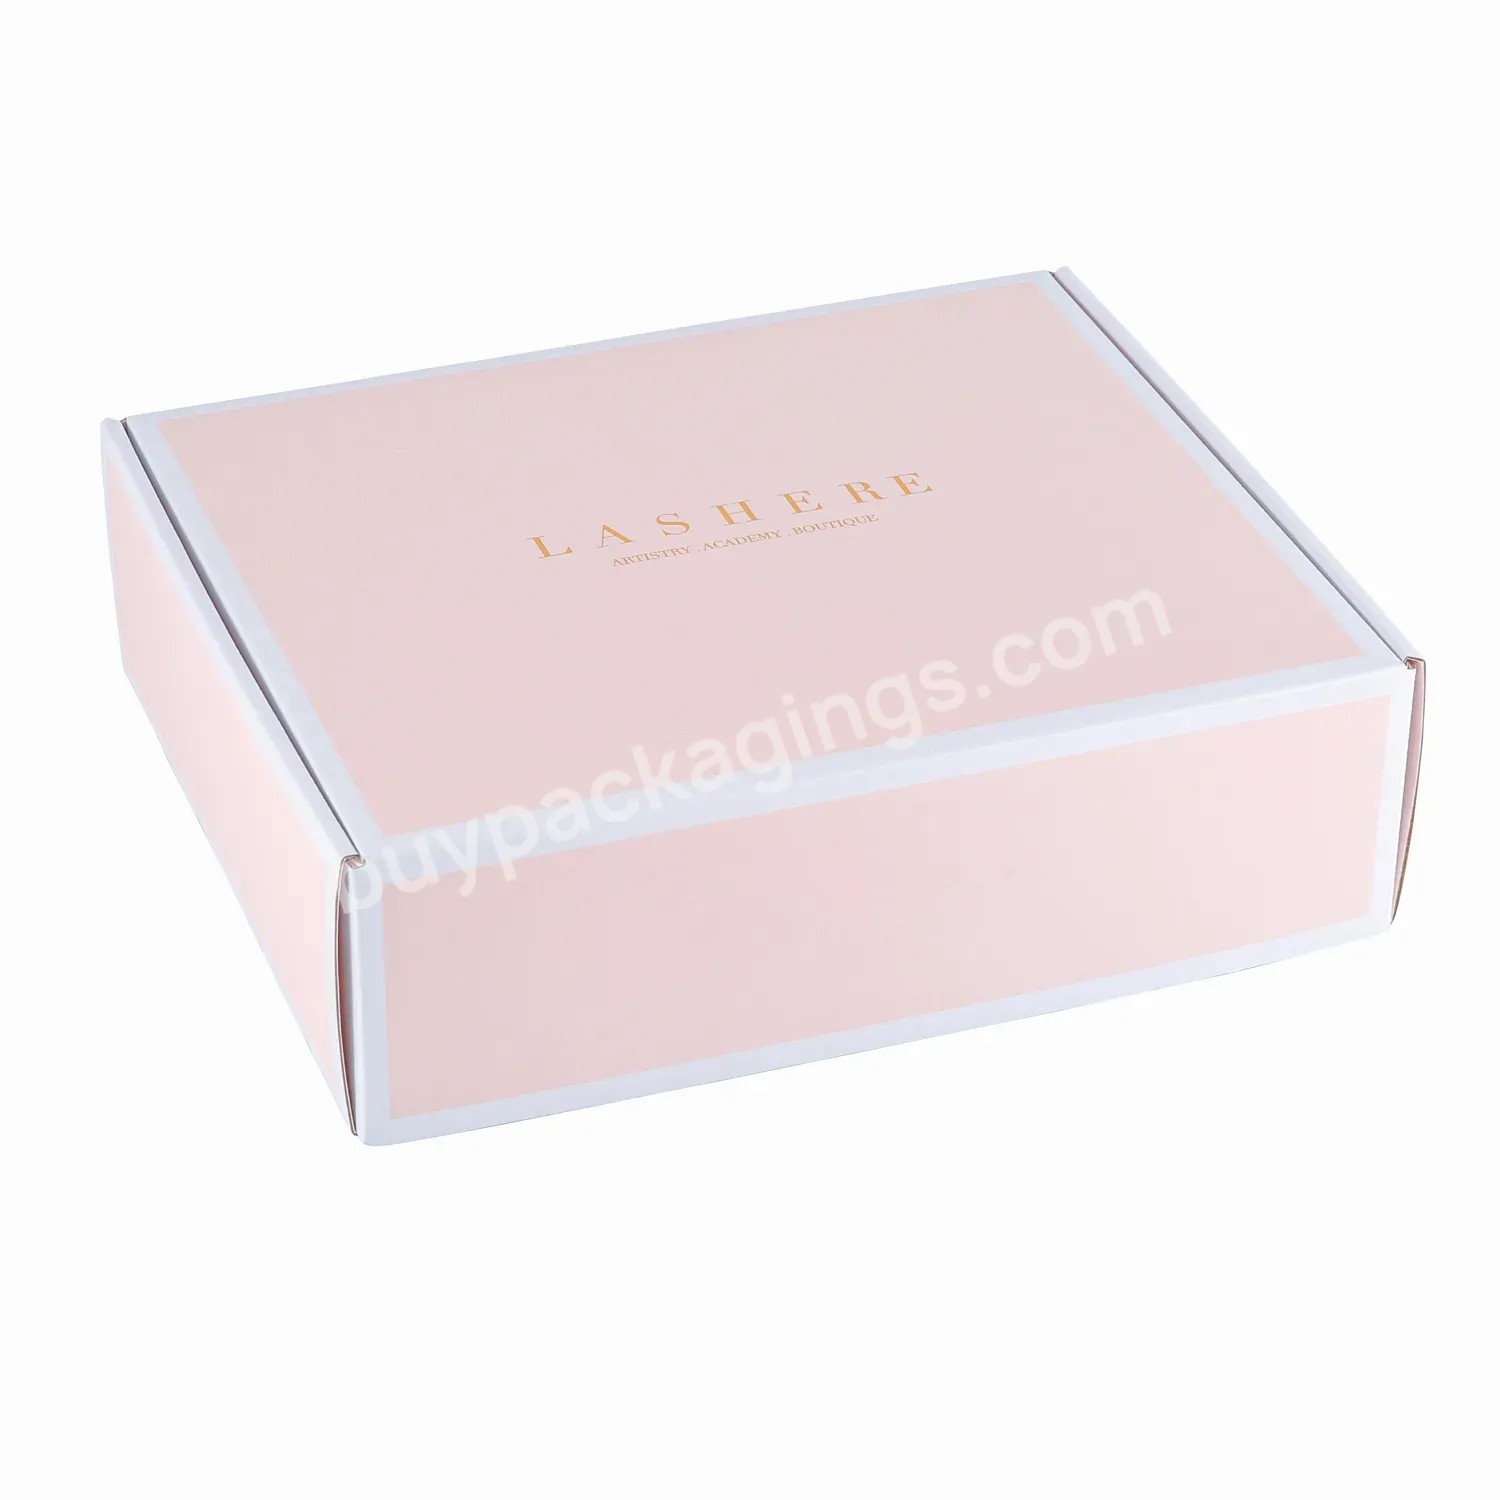 Custom Paper Box Socks&clothes Packaging Corrugated Boxes